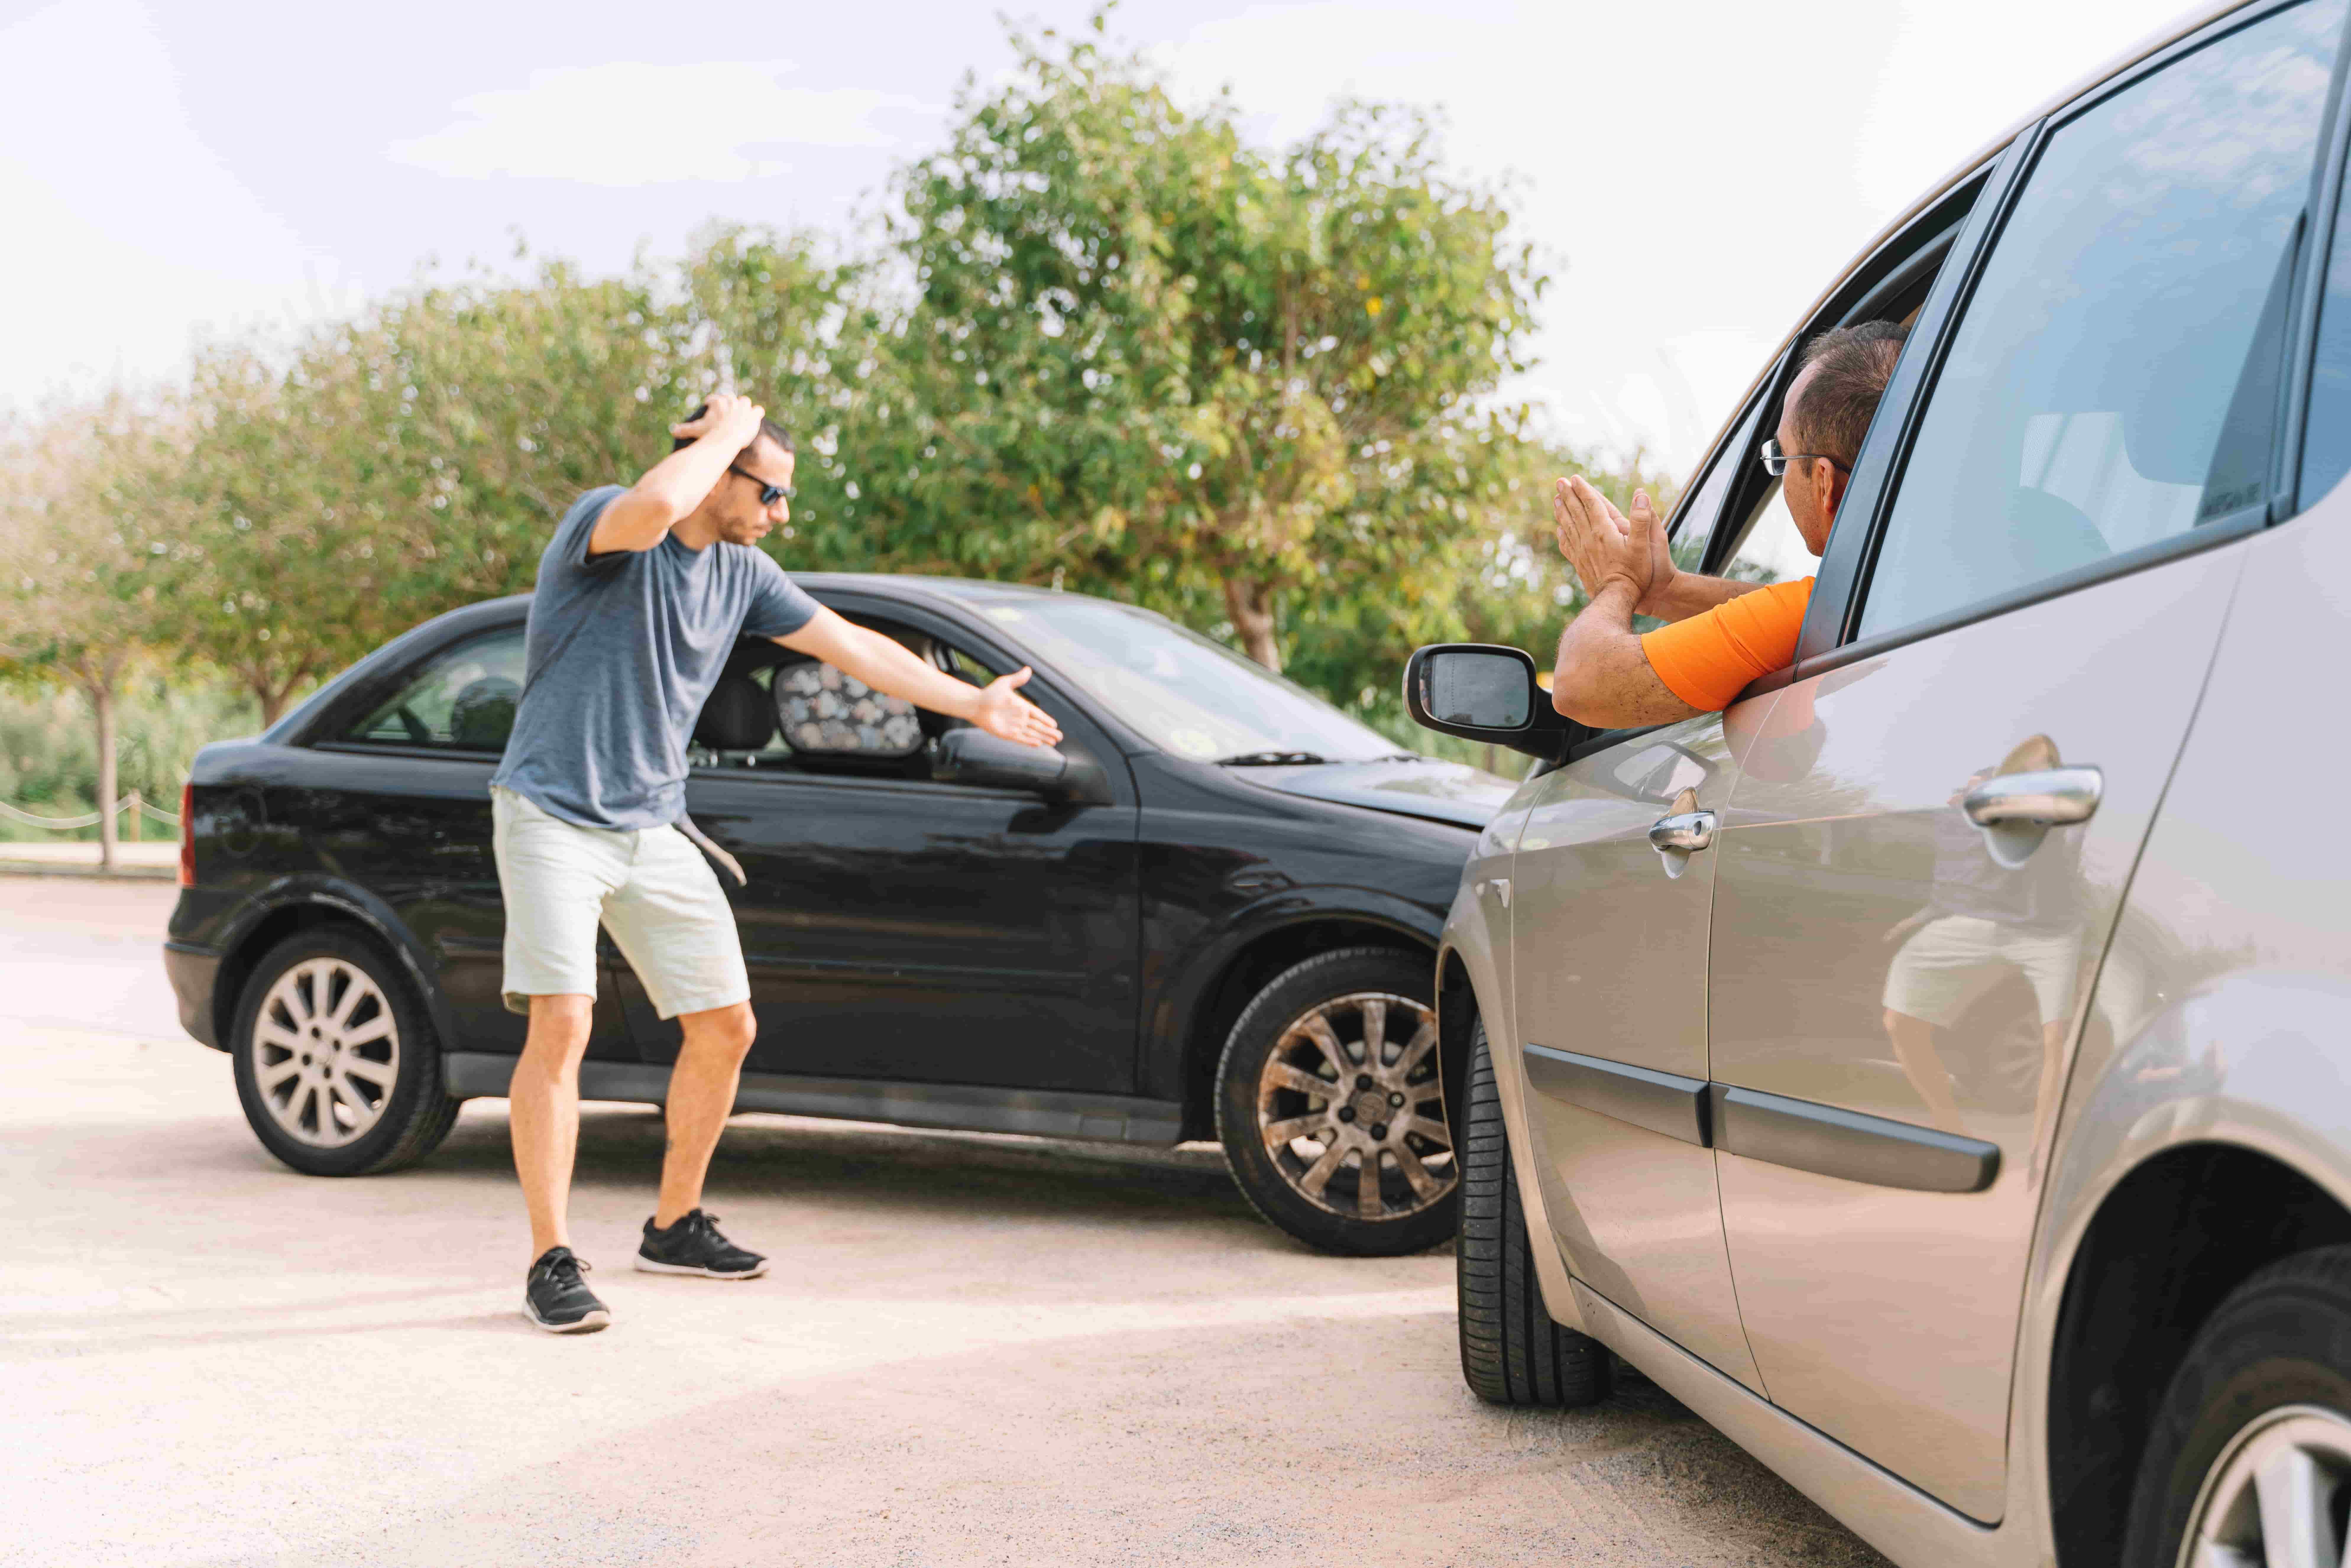 What Happens if I Don’t Have Personal Injury Insurance in Florida?